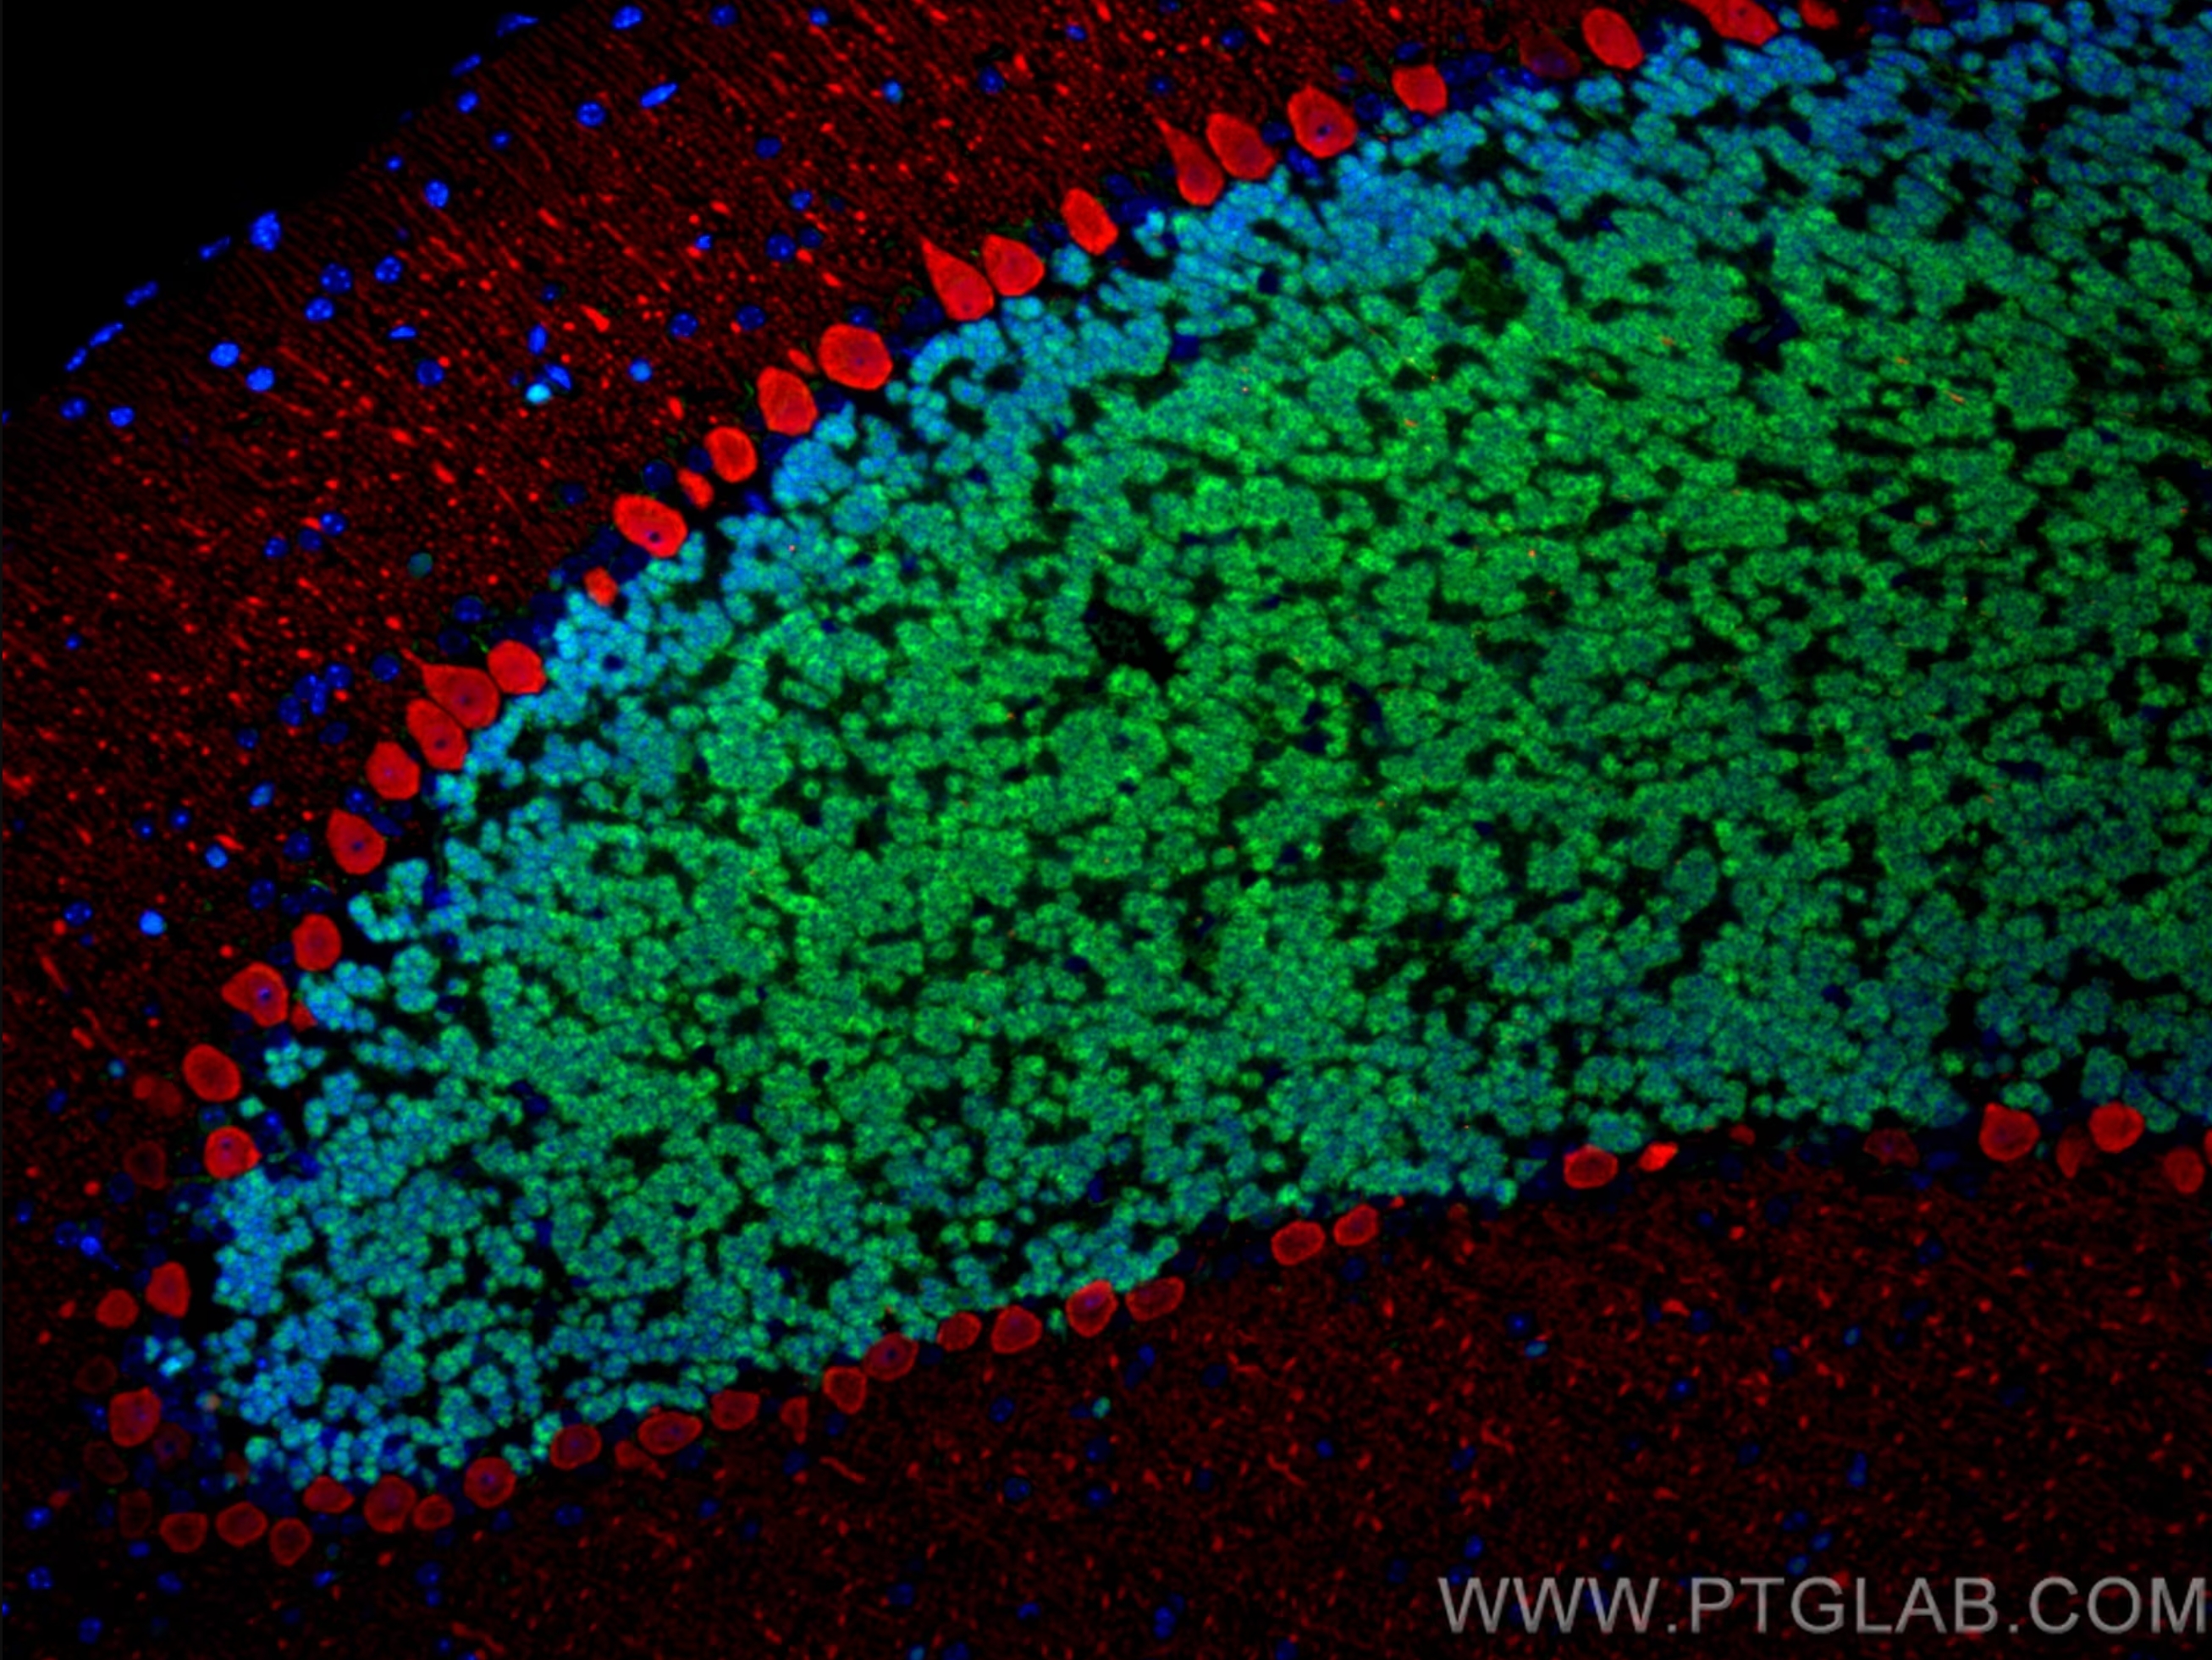 Immunofluorescence (IF) analysis of mouse cerebellum FFPE tissue stained with rabbit anti-NeuN polyclonal antibody (26975-1-AP, green) and mouse anti-Calbindin-D28k monoclonal antibody (66394-1-Ig, red). Multi-rAb CoraLite® Plus 488-Goat Anti-Rabbit Recombinant Secondary Antibody (H+L) (RGAM002, 1:500) and Multi-rAb CoraLite® Plus 594-Goat Anti-Mouse Recombinant Secondary Antibody (H+L) (RGAM004, 1:500) were used for detection.  